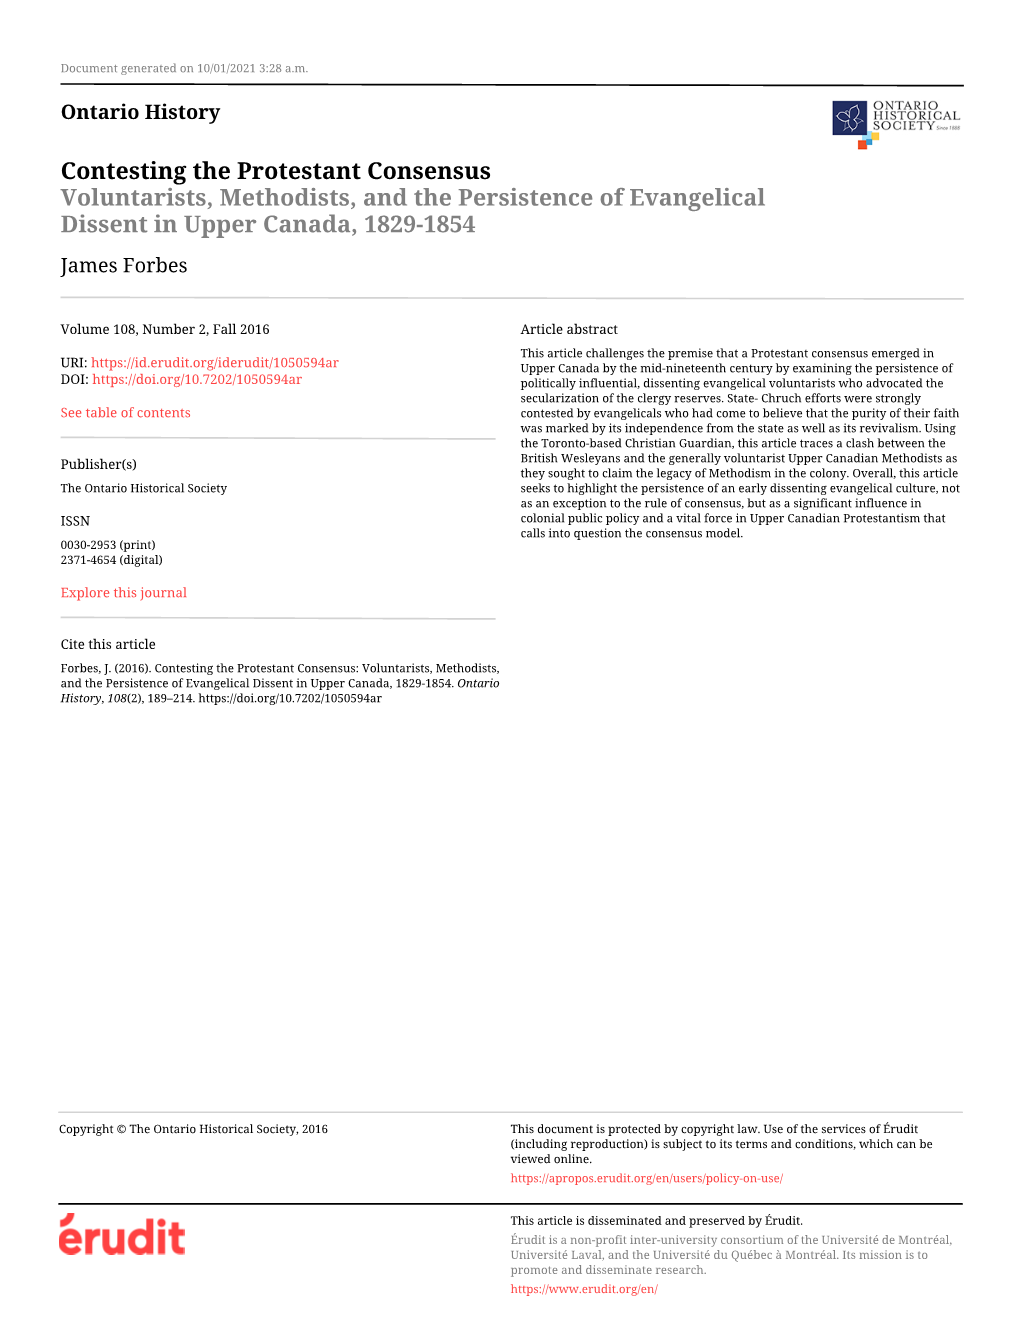 Contesting the Protestant Consensus Voluntarists, Methodists, and the Persistence of Evangelical Dissent in Upper Canada, 1829-1854 James Forbes